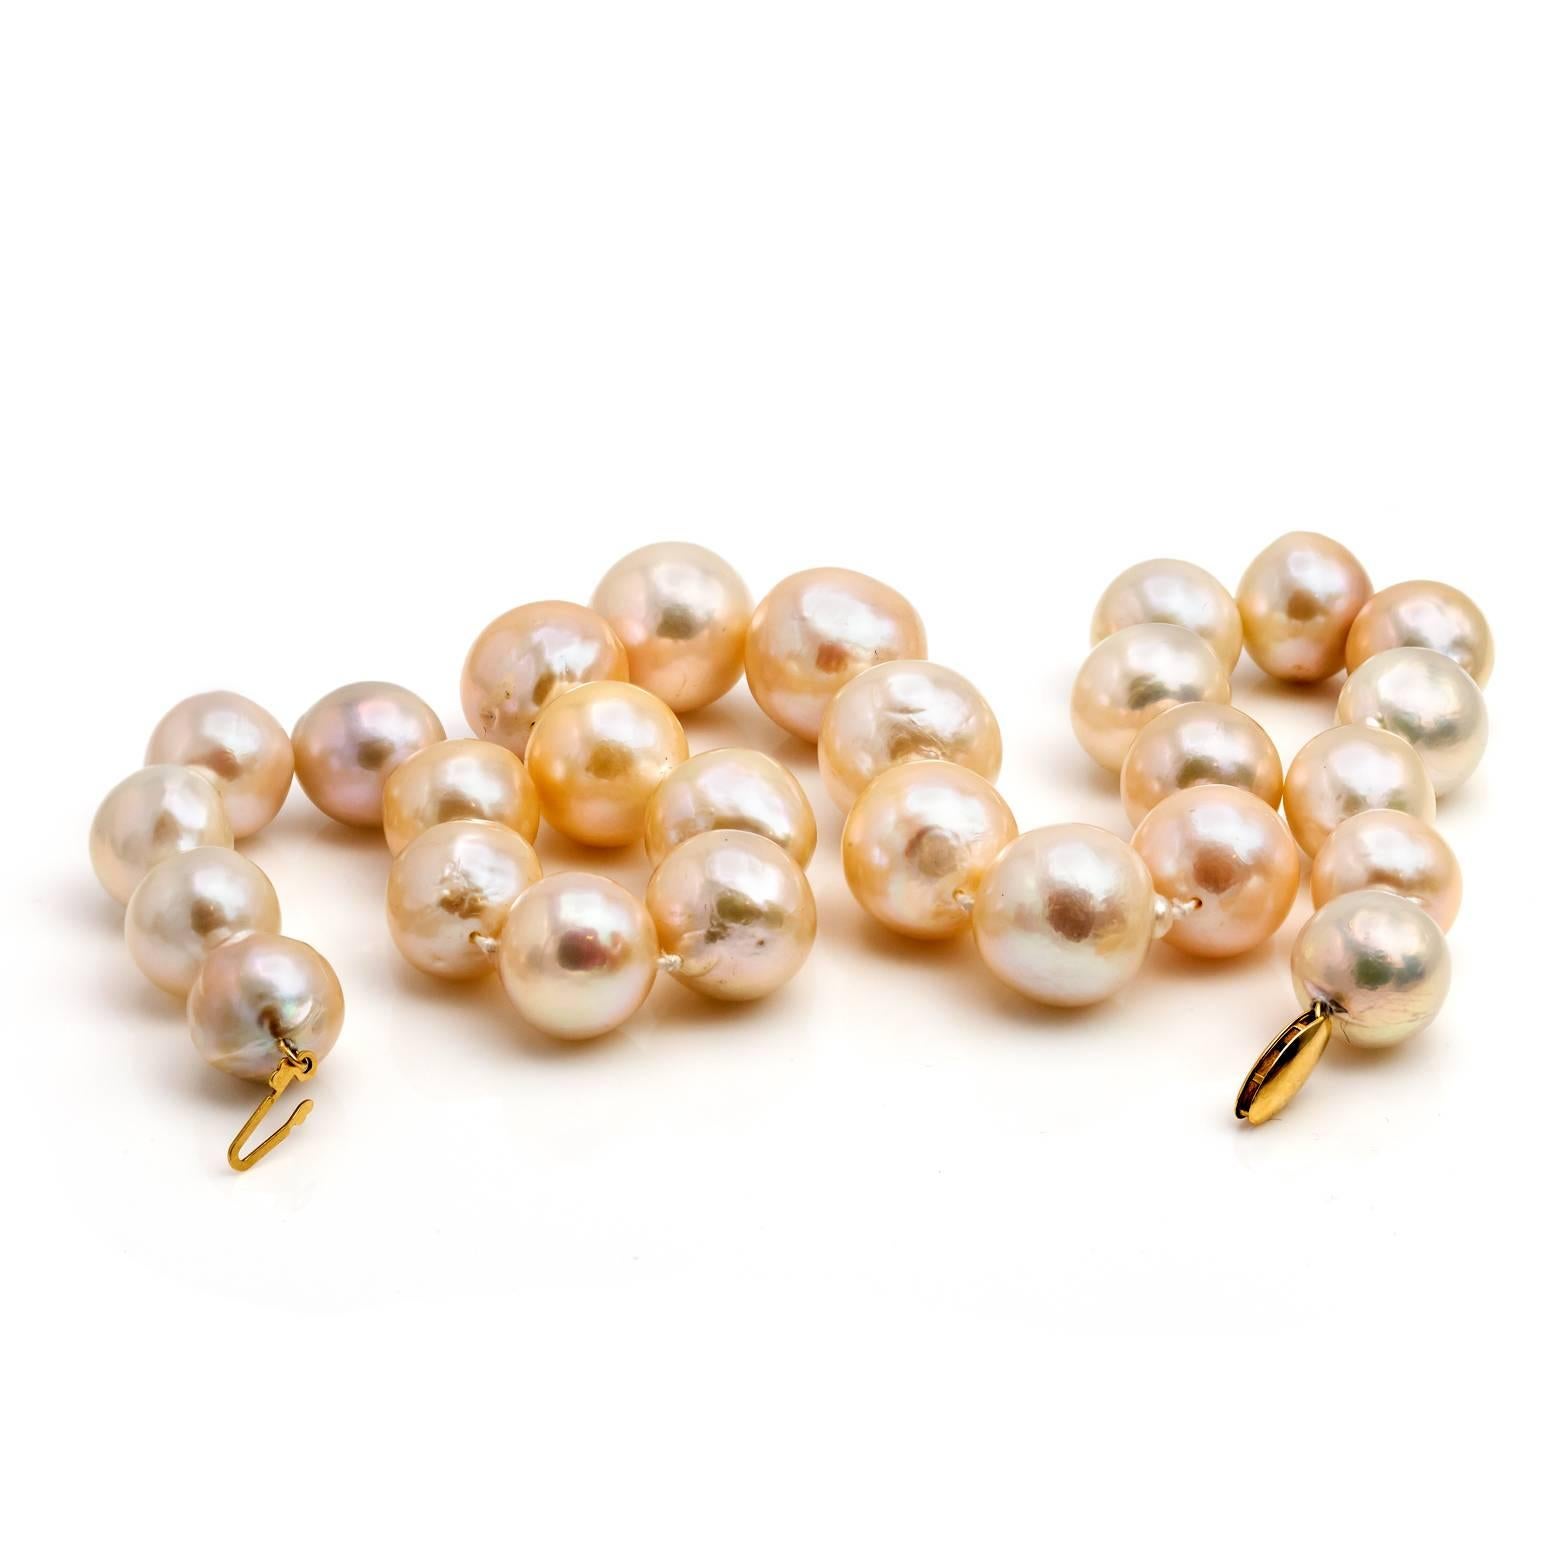 Women's Large Fresh Water Pearl Necklace in Light Peachy Pink and Silver Hues Gold Clasp